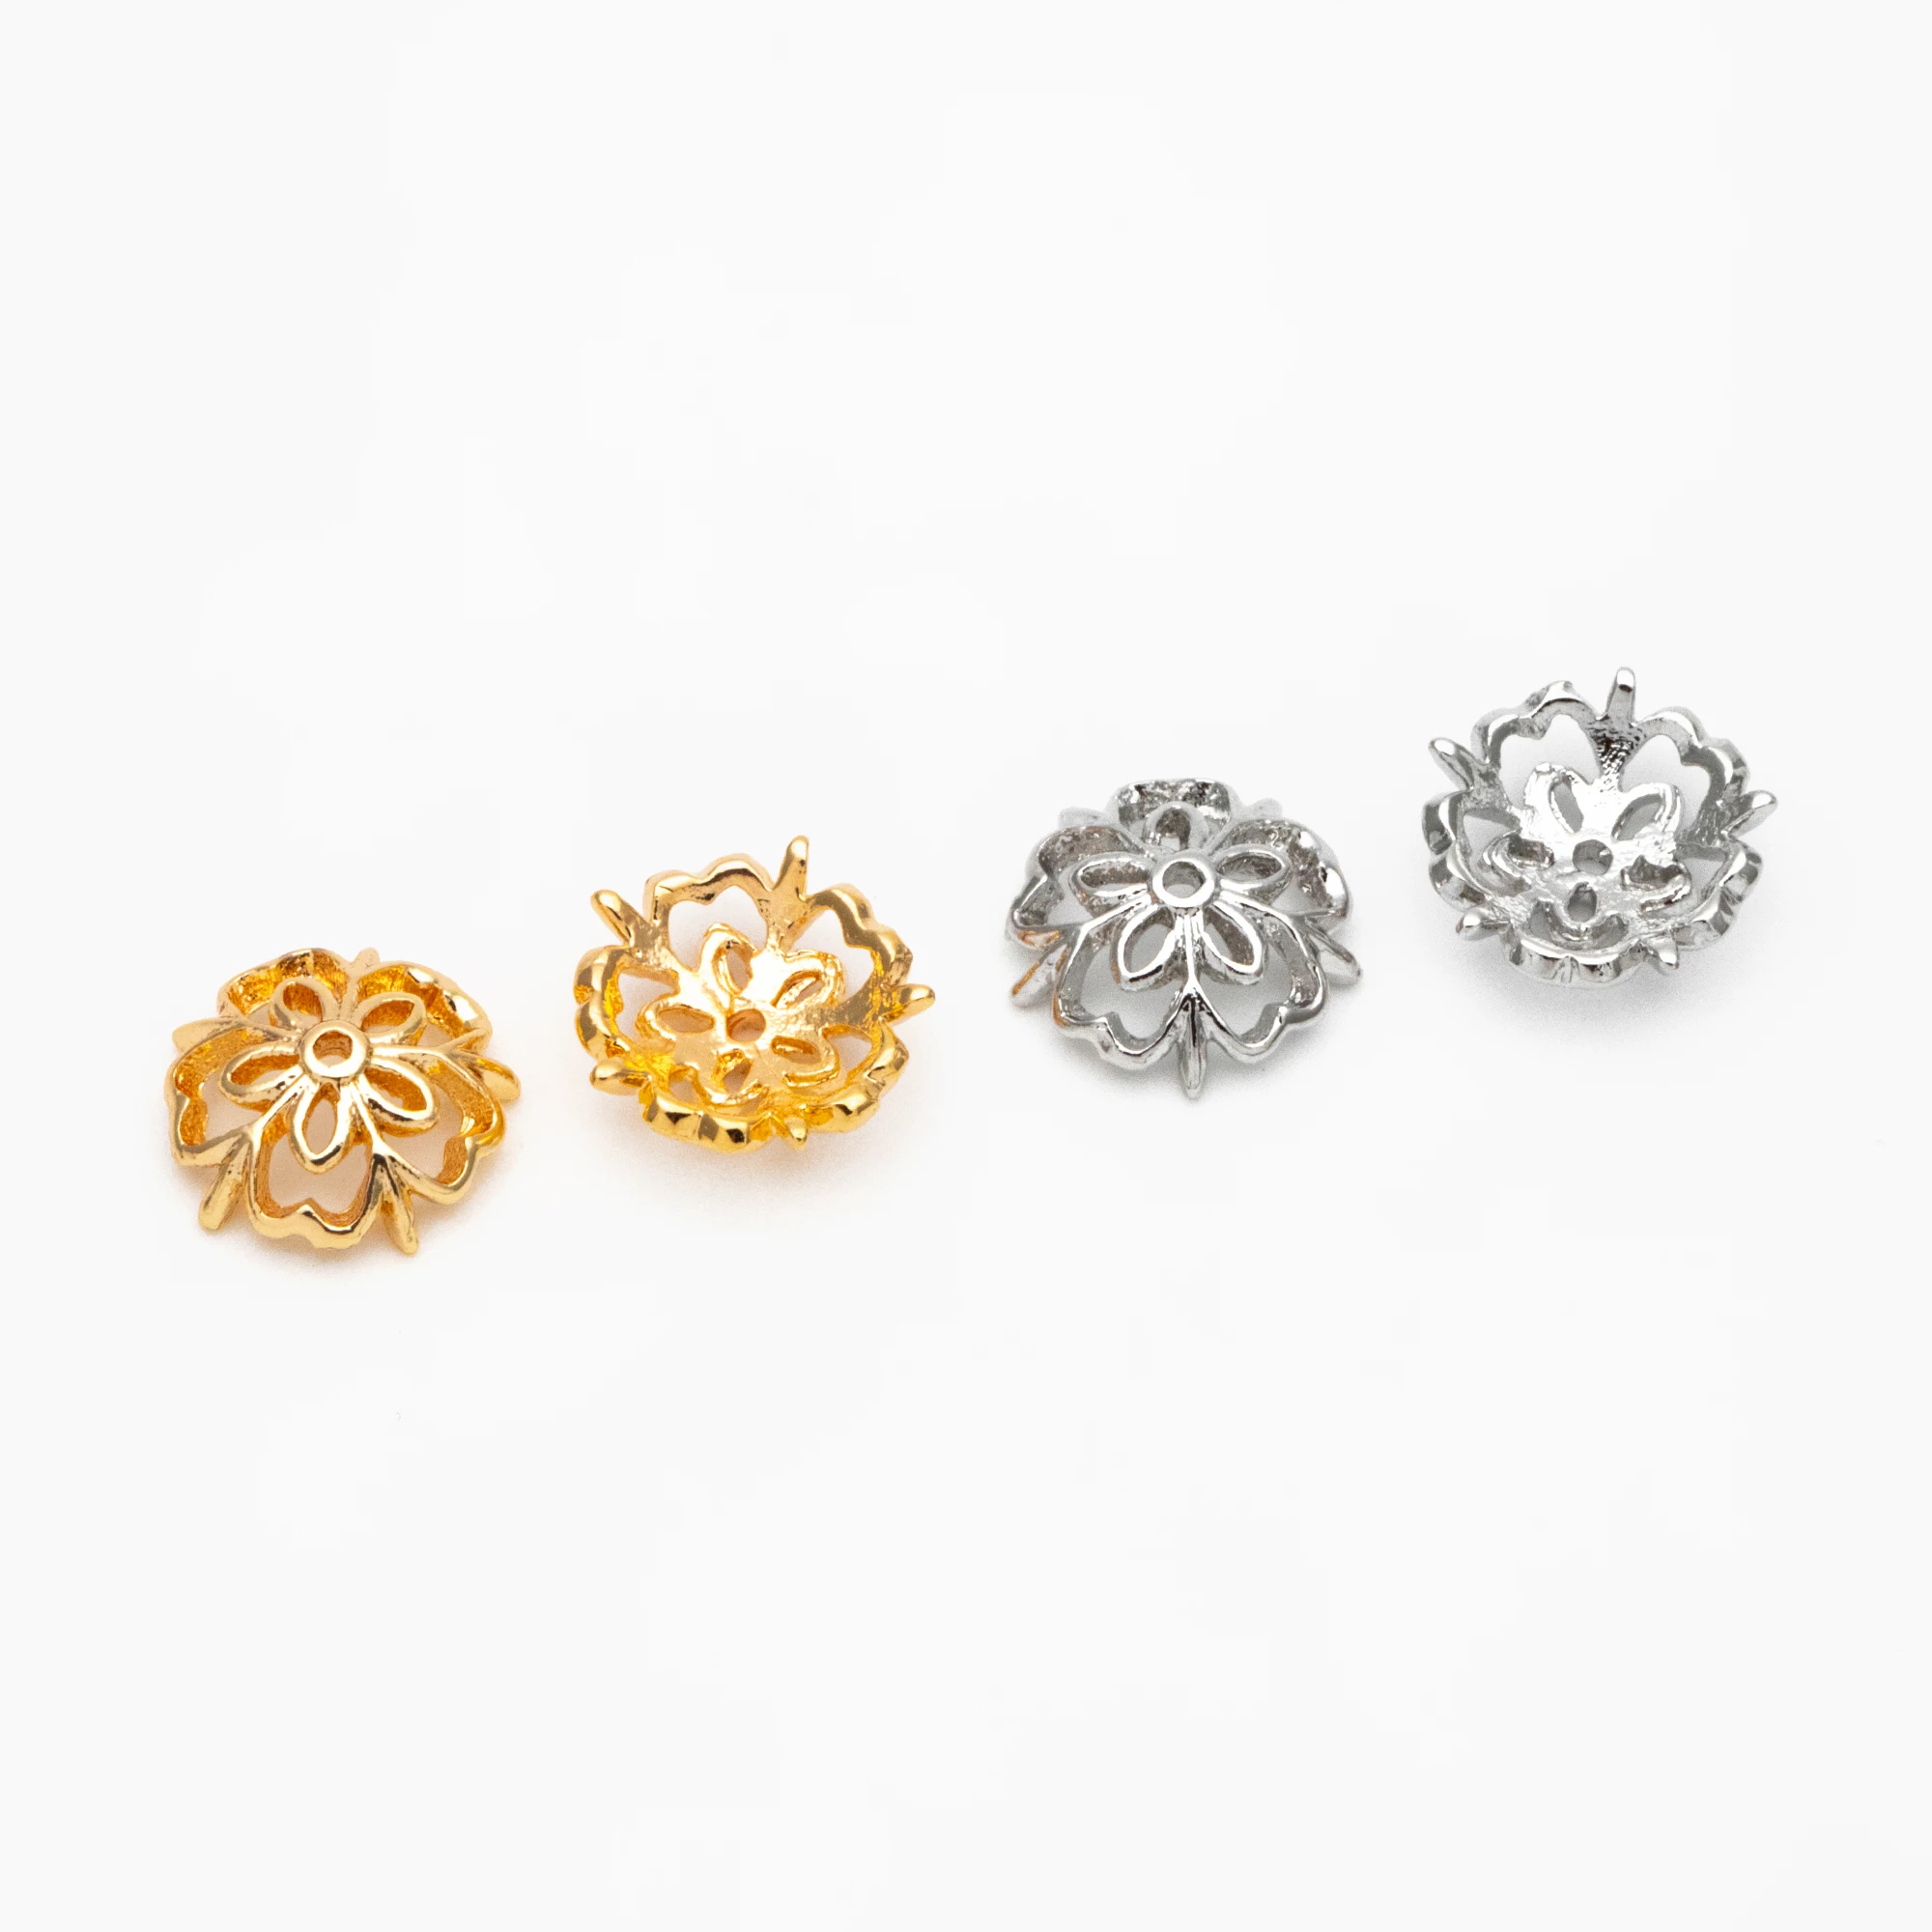 

20pcs Gold/ Silver Floral Bead Caps 9mm, Fit 10-12mm Beads, Real Gold/ Rhodium Plated Brass, Lead Nickel Free (GB-053)